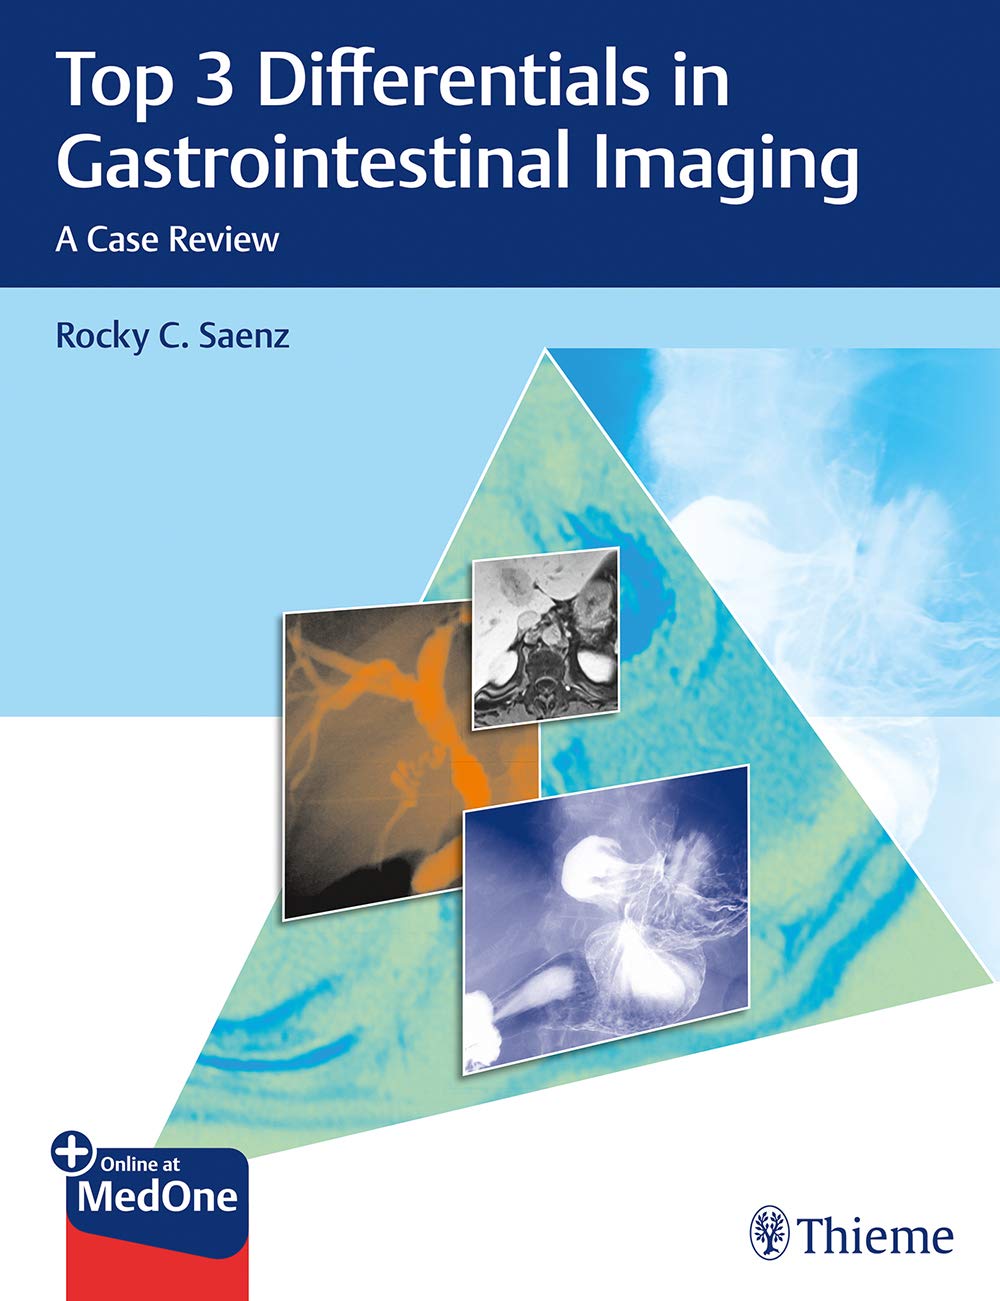 Top 3 Differentials In Gastrointestinal Imaging: A Case Review